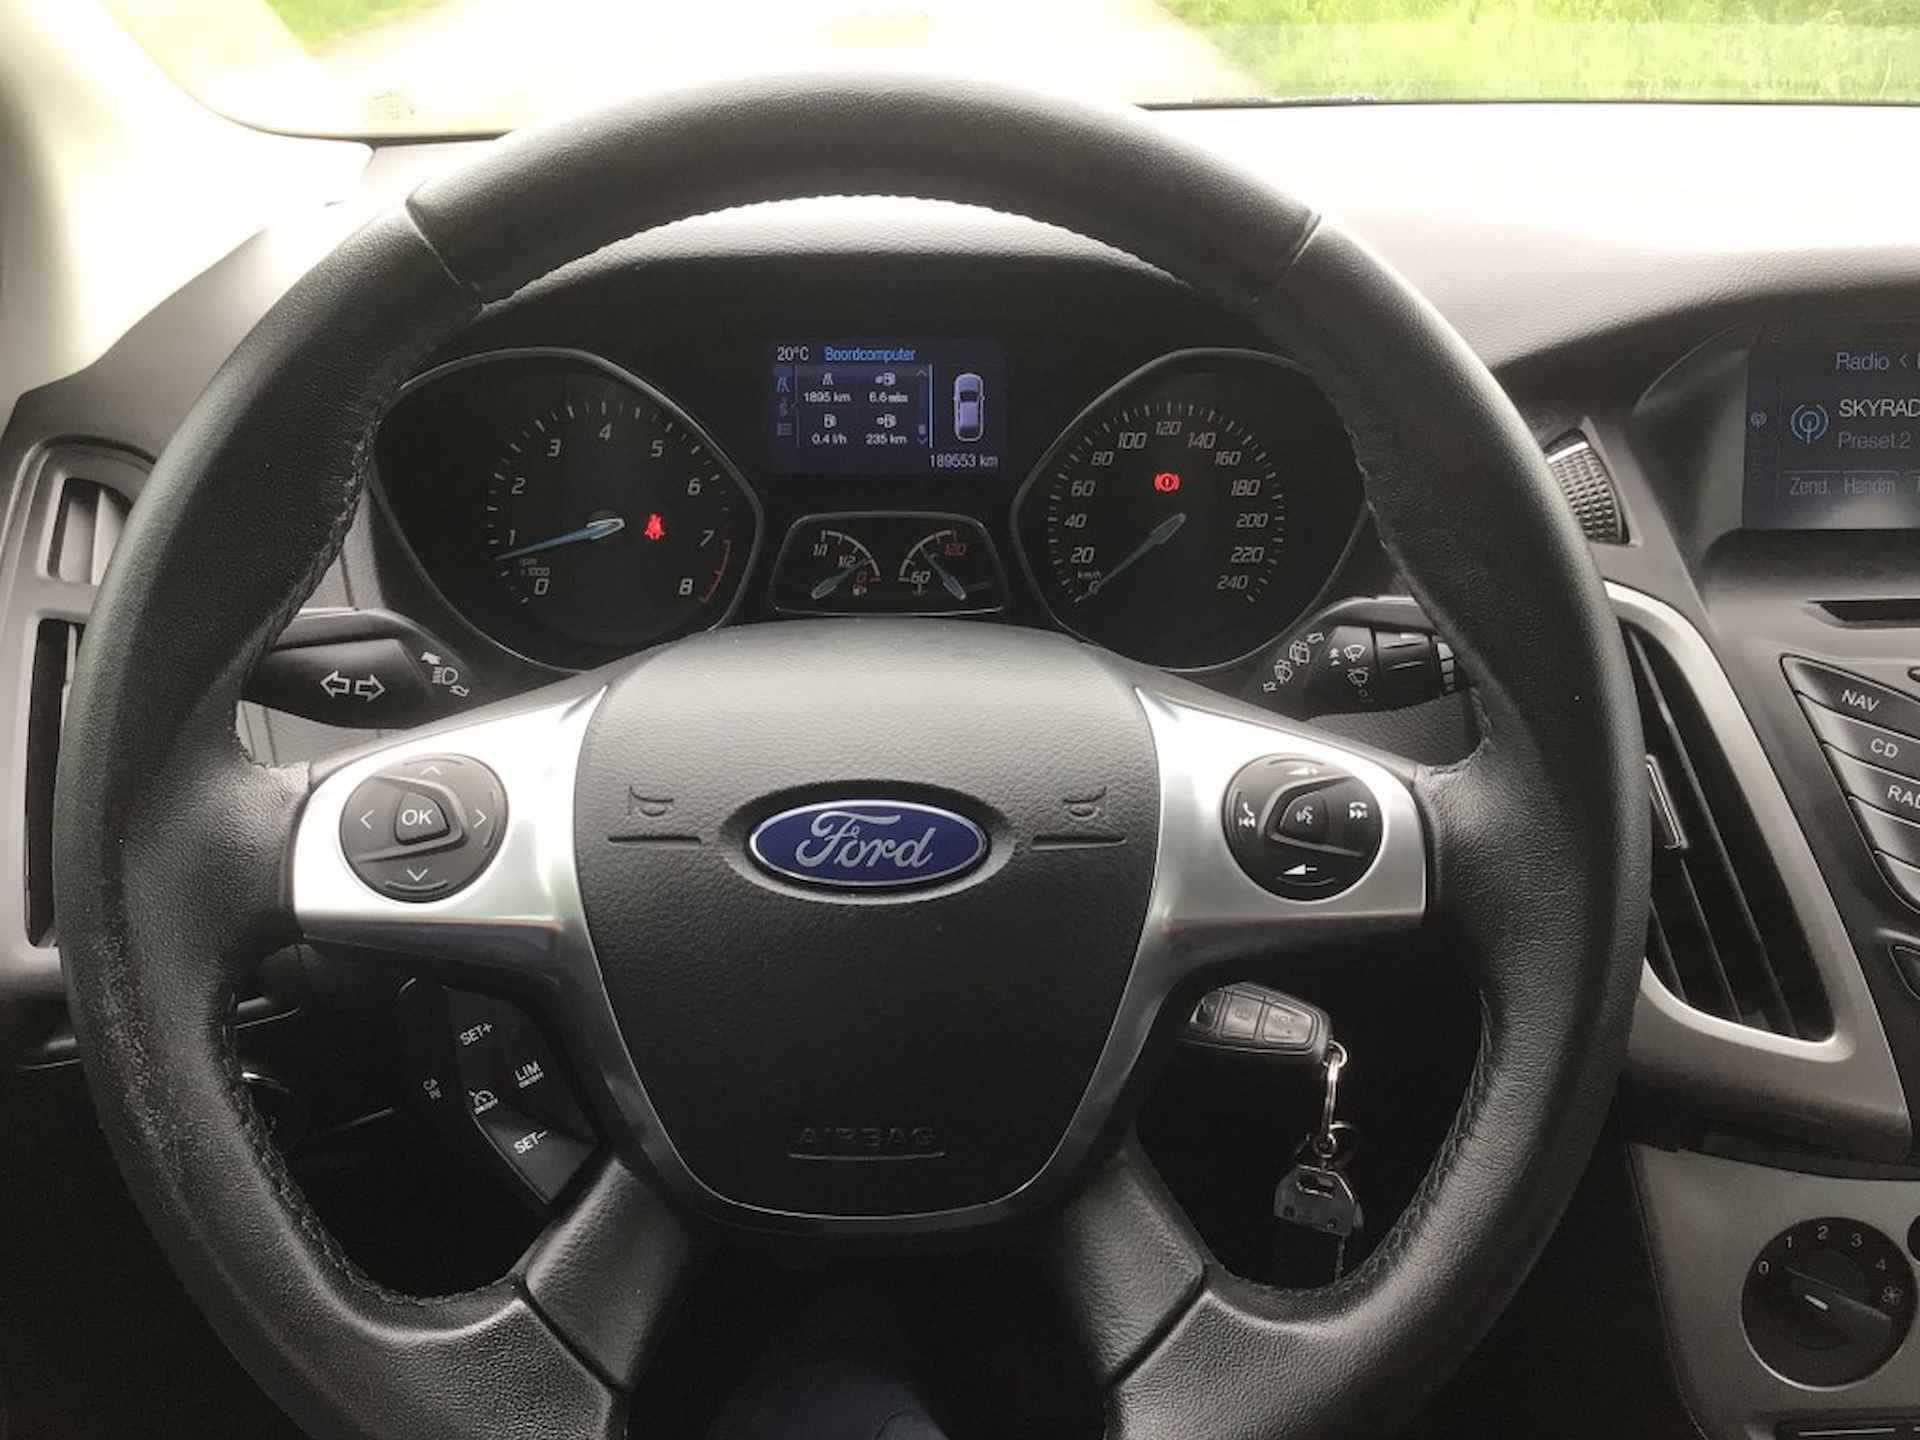 FORD Focus wagon 1.0 Ecoboost Edition - 9/11